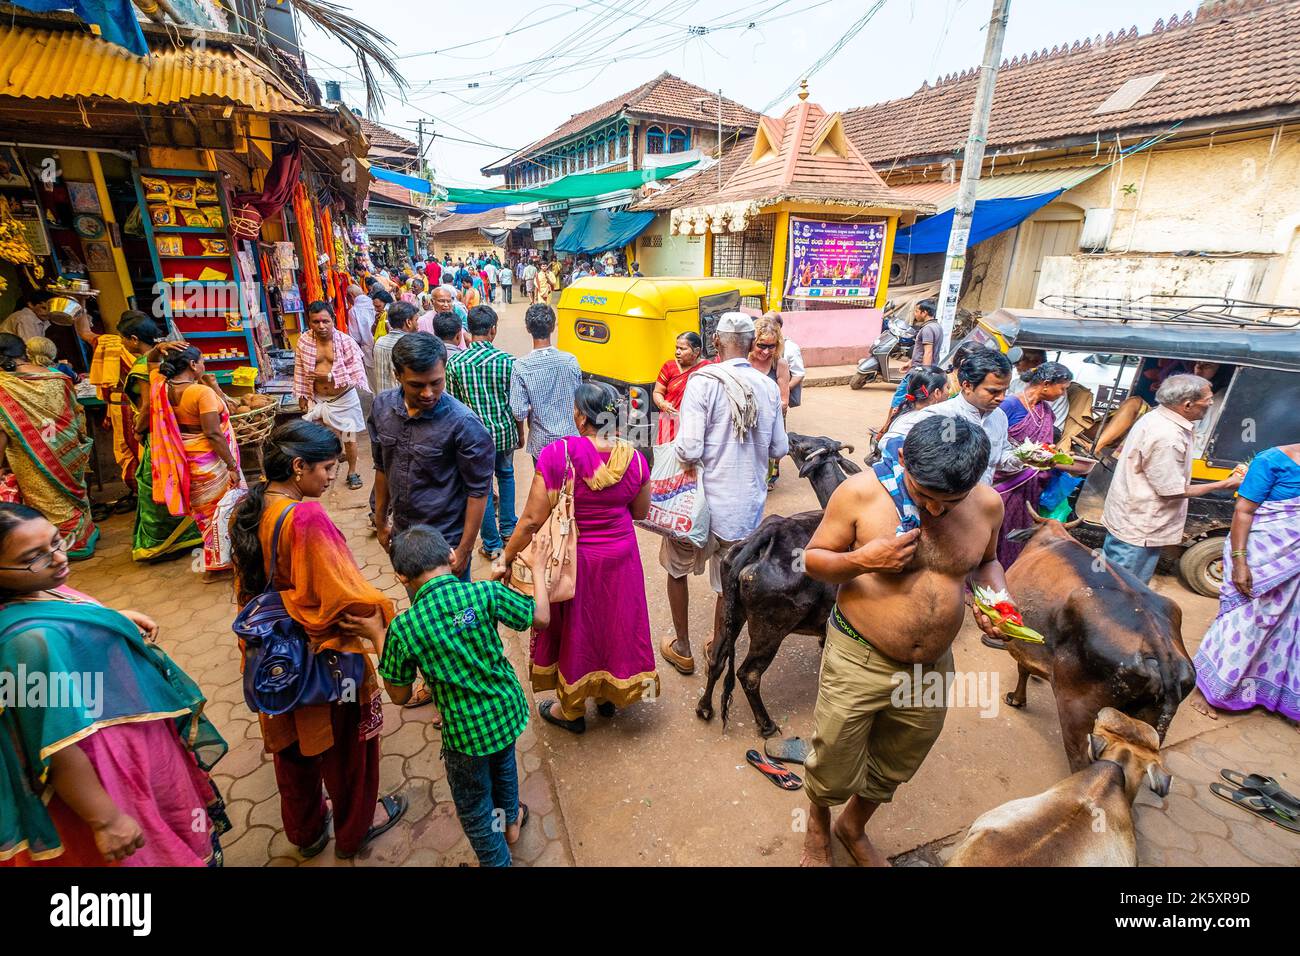 Street scenes in a small rural Indian town Stock Photo